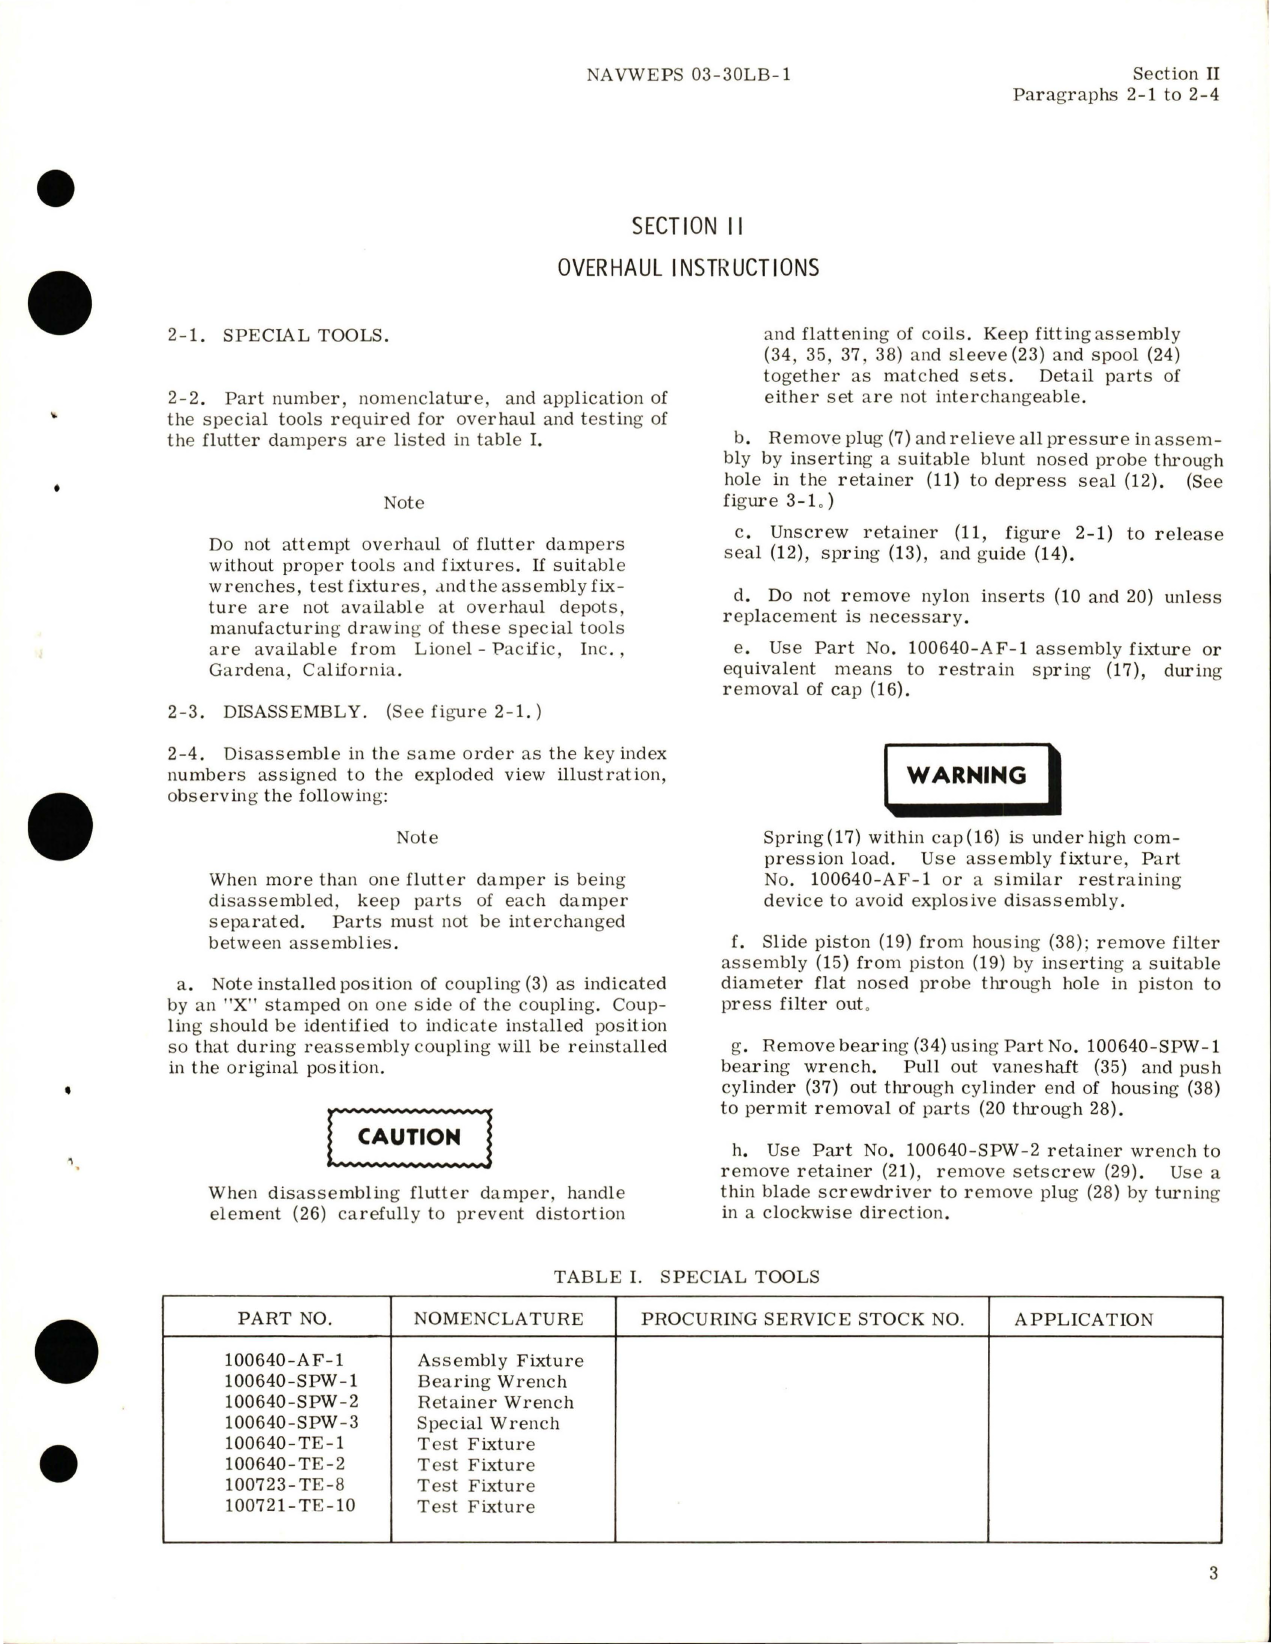 Sample page 7 from AirCorps Library document: Overhaul Instructions for Flutter Dampers - Parts 100721A, 100721A-1, 100721A-3, 100723A, and 100723A-1